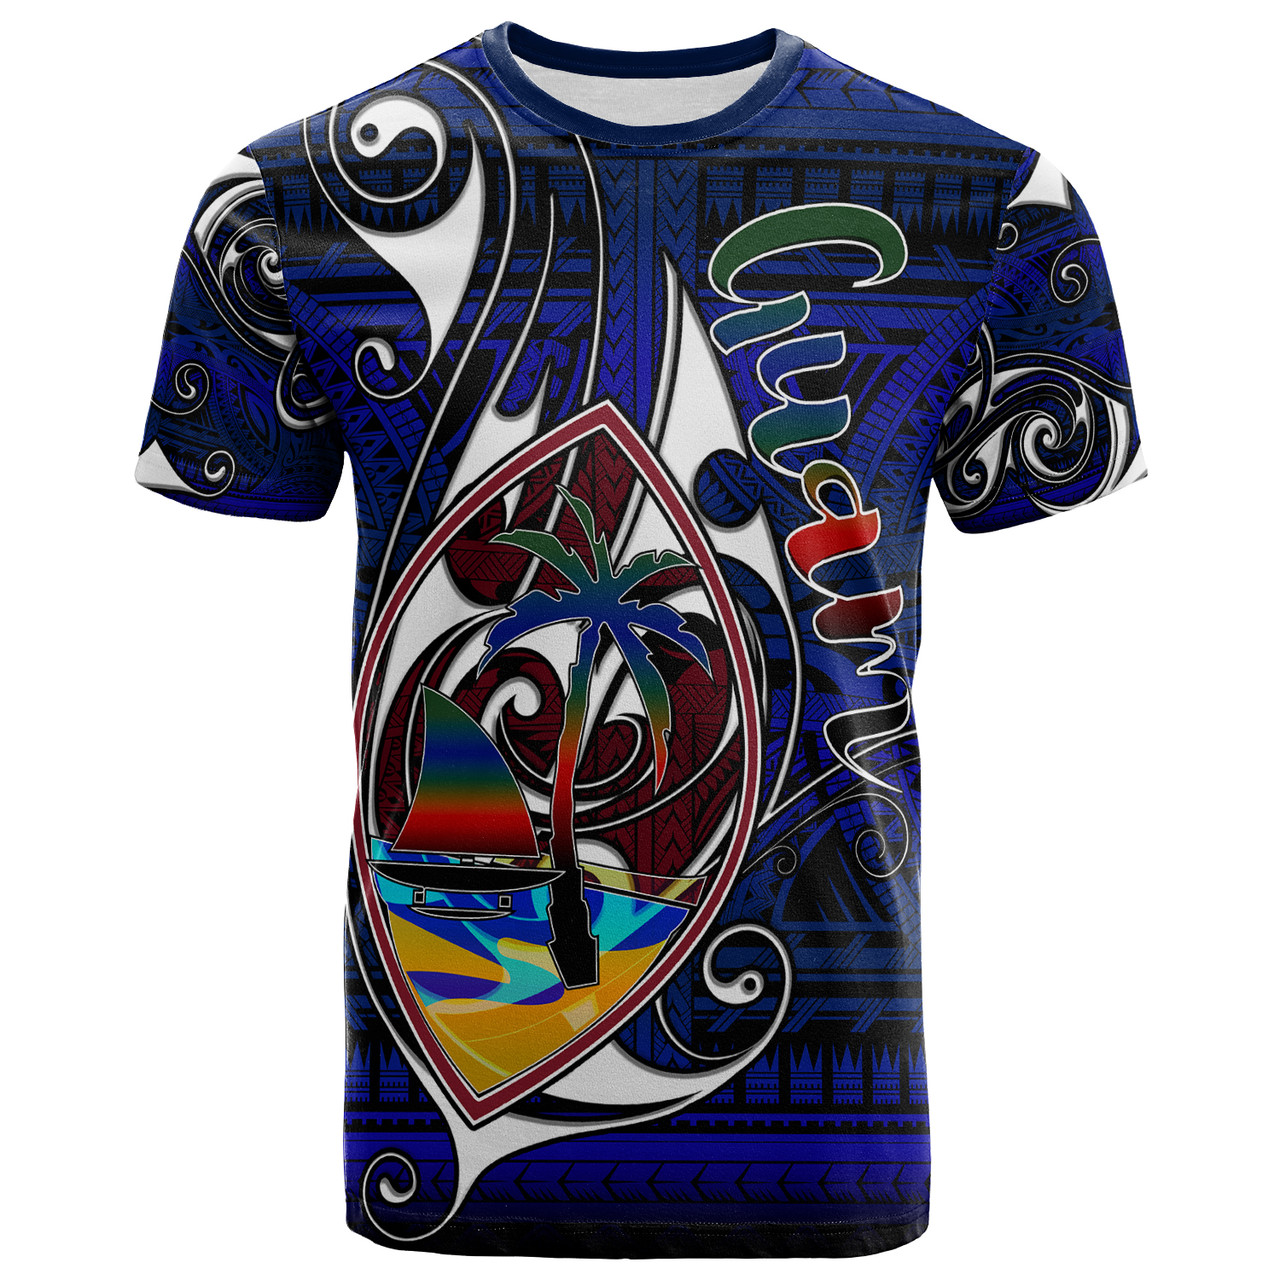 Guam T-Shirt- Custom Guam Independence Day With Hook Polynesian Patterns